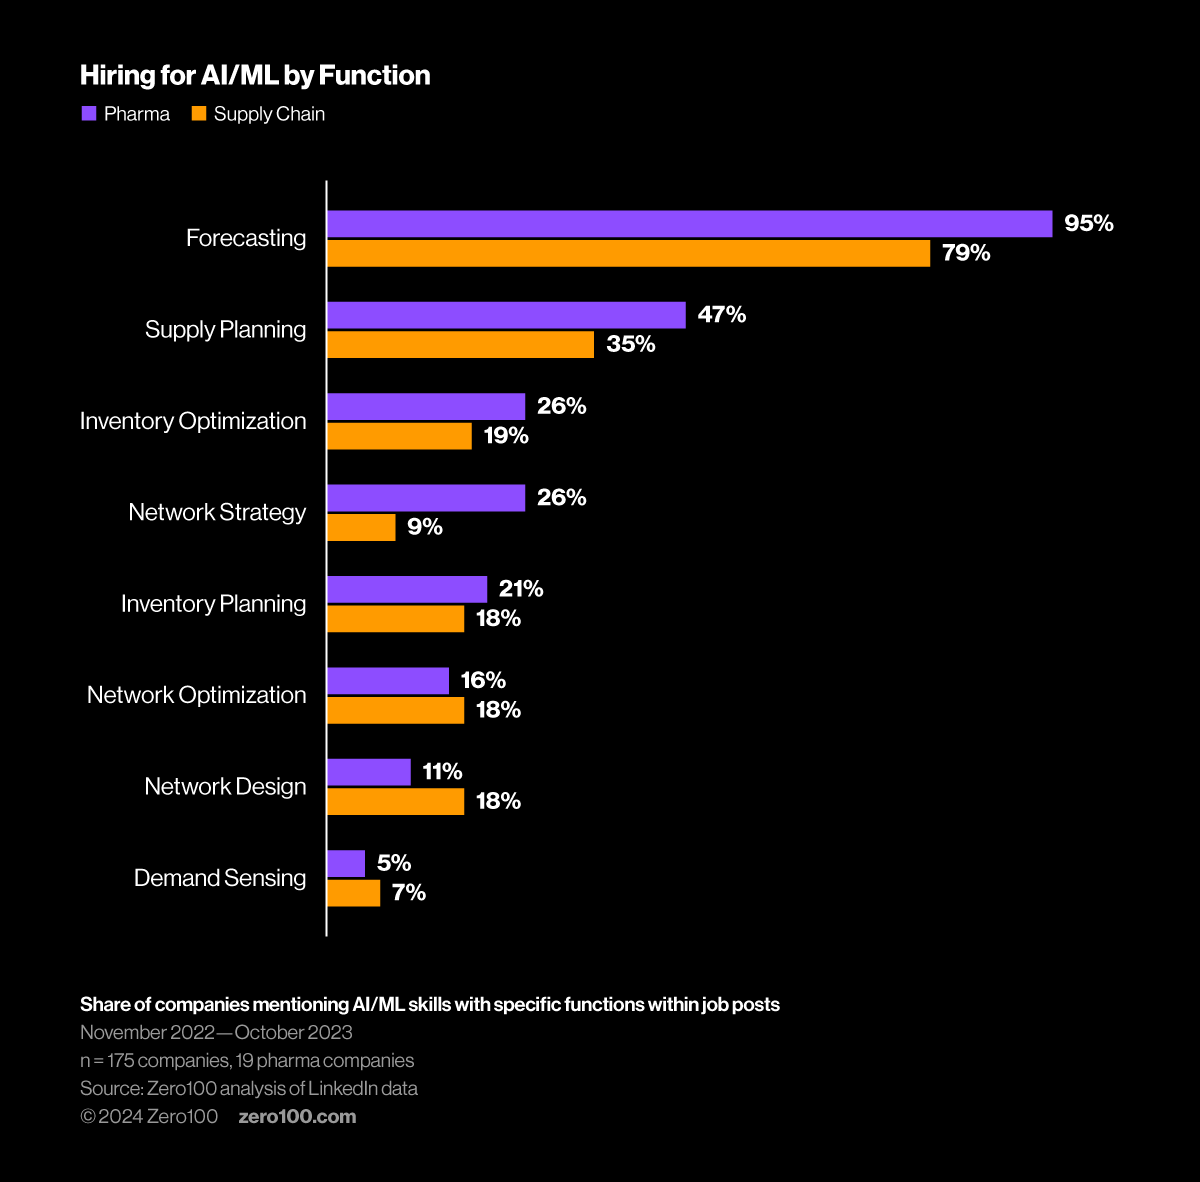 Bar chart showing share of companies mentioning AI/ML skills and specific functions within job posts.
Source: Zero100